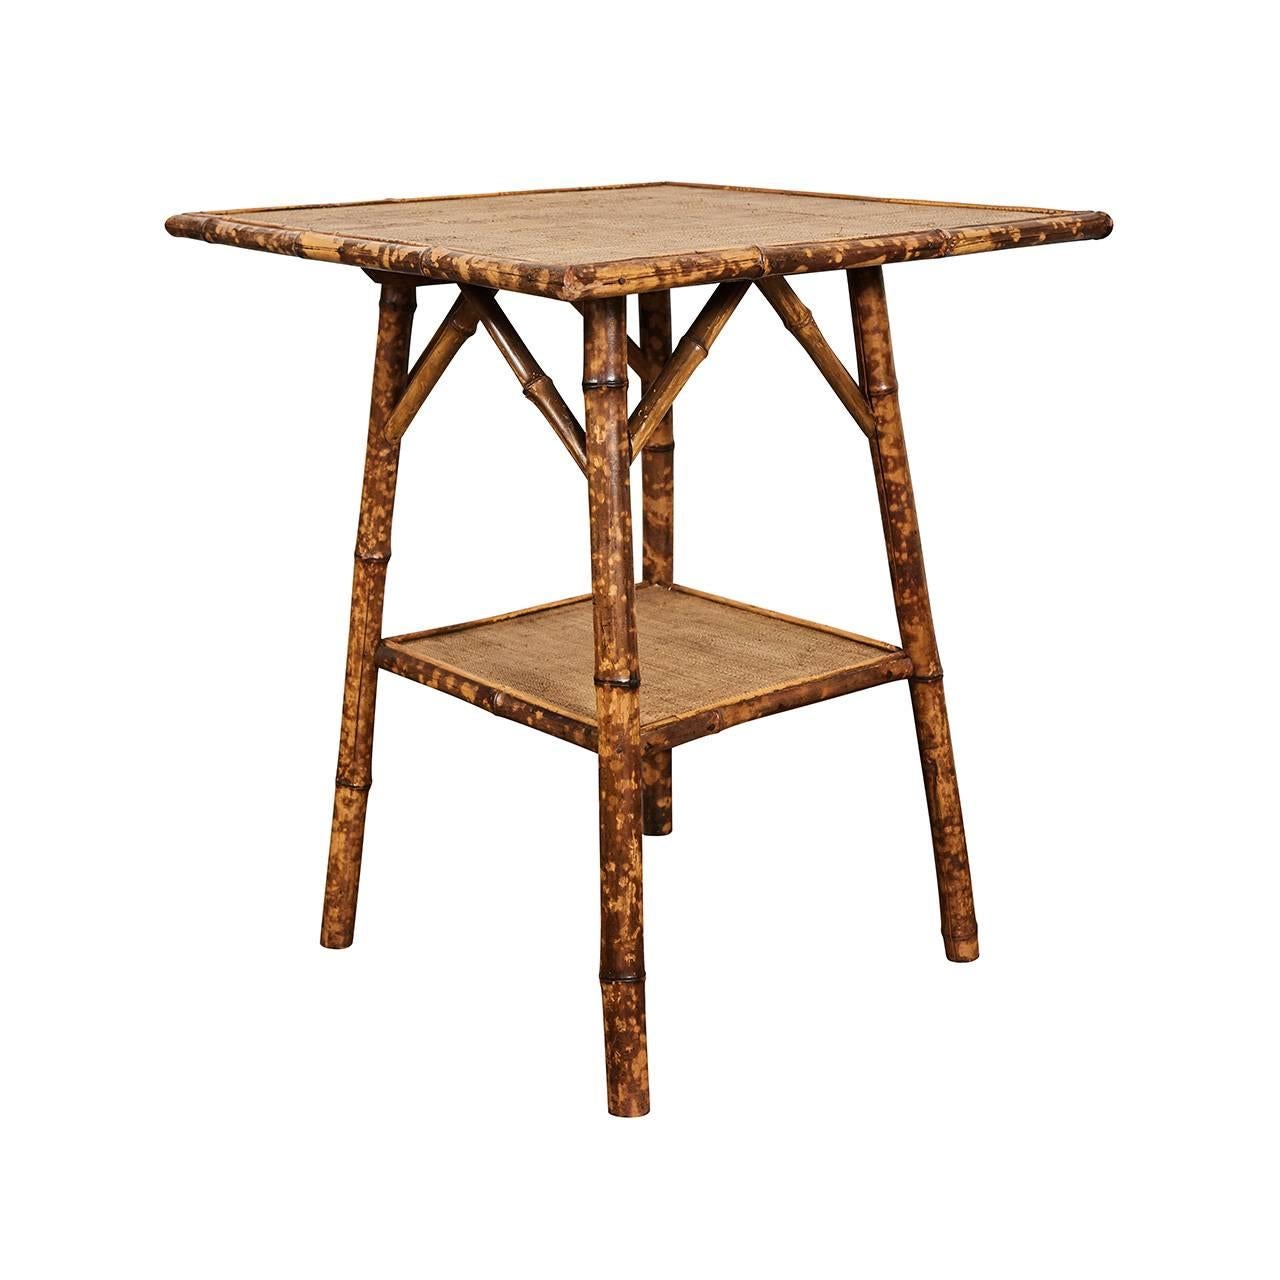 This nice square top English Victorian tiger bamboo table has angled supports and one shelf. The legs have been reinforced with wooden dowels for increased sturdiness. The surfaces have been newly re-done in waxed raffia matting. We have more of